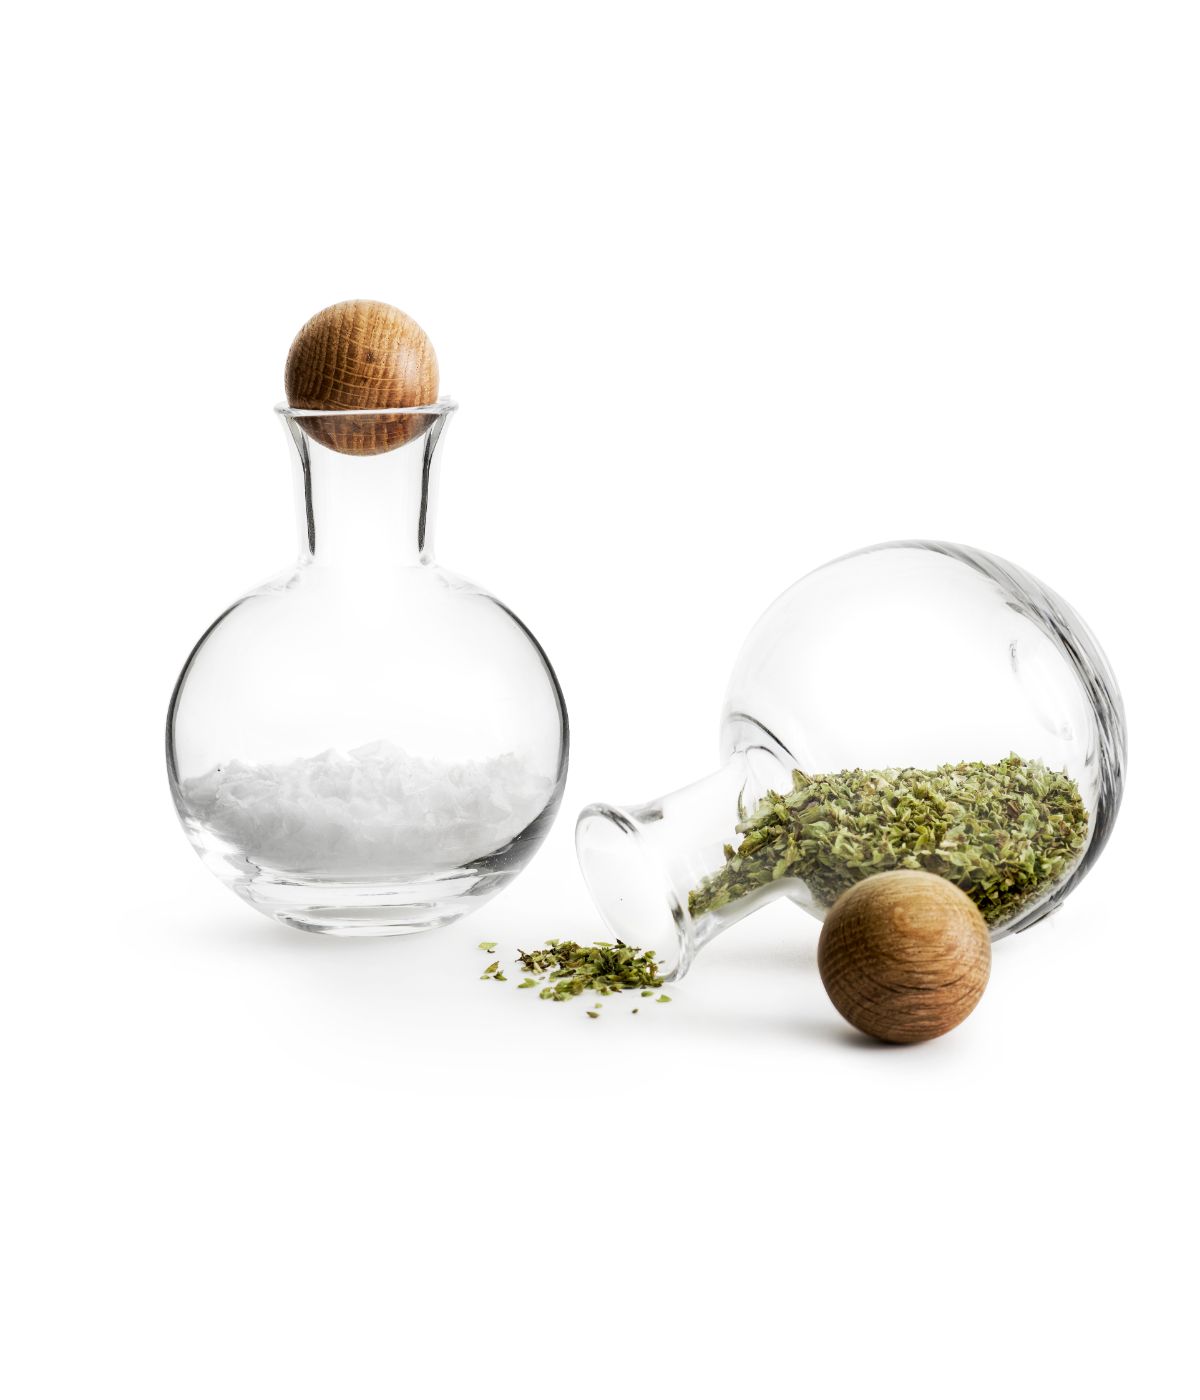 Sagaform By Widgeteer Nature Glass Spice Serving Set With Oak Stoppers, Set of 2 Clear/Brown